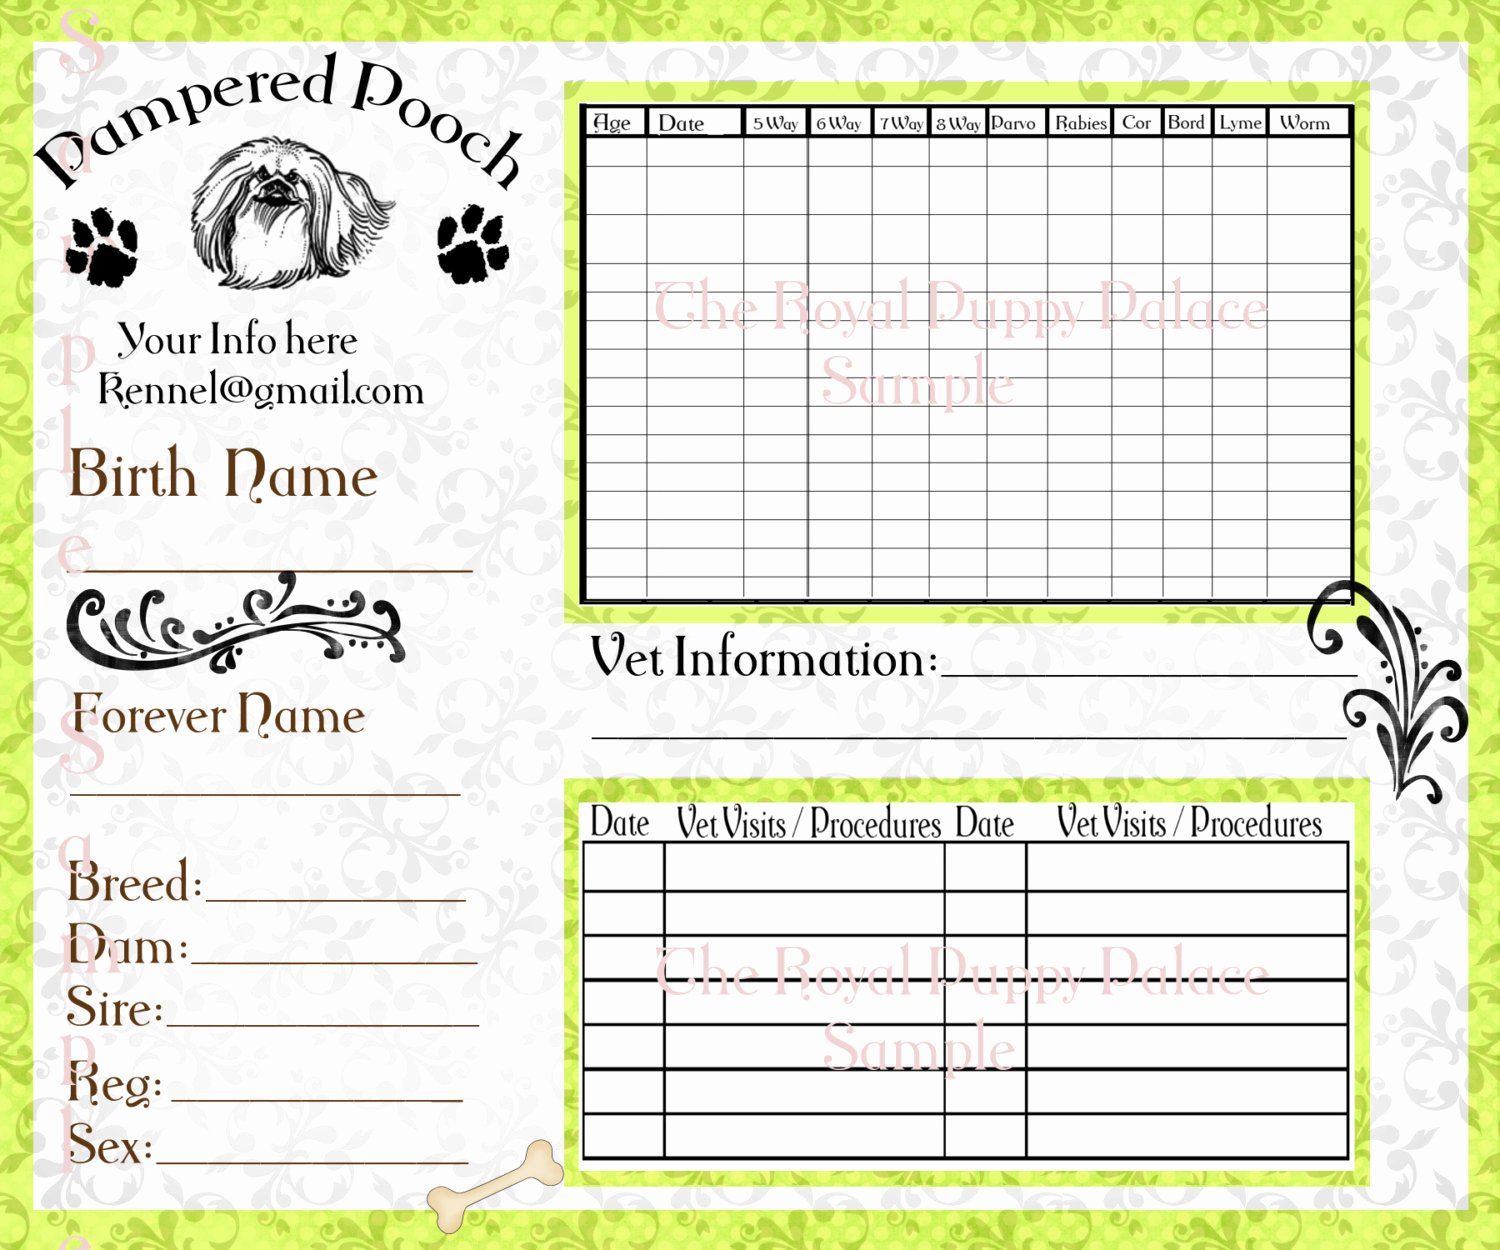 Dog Vaccination Record Template Unique Pampered Pooch Green Customizable Vaccination Cards for Dog